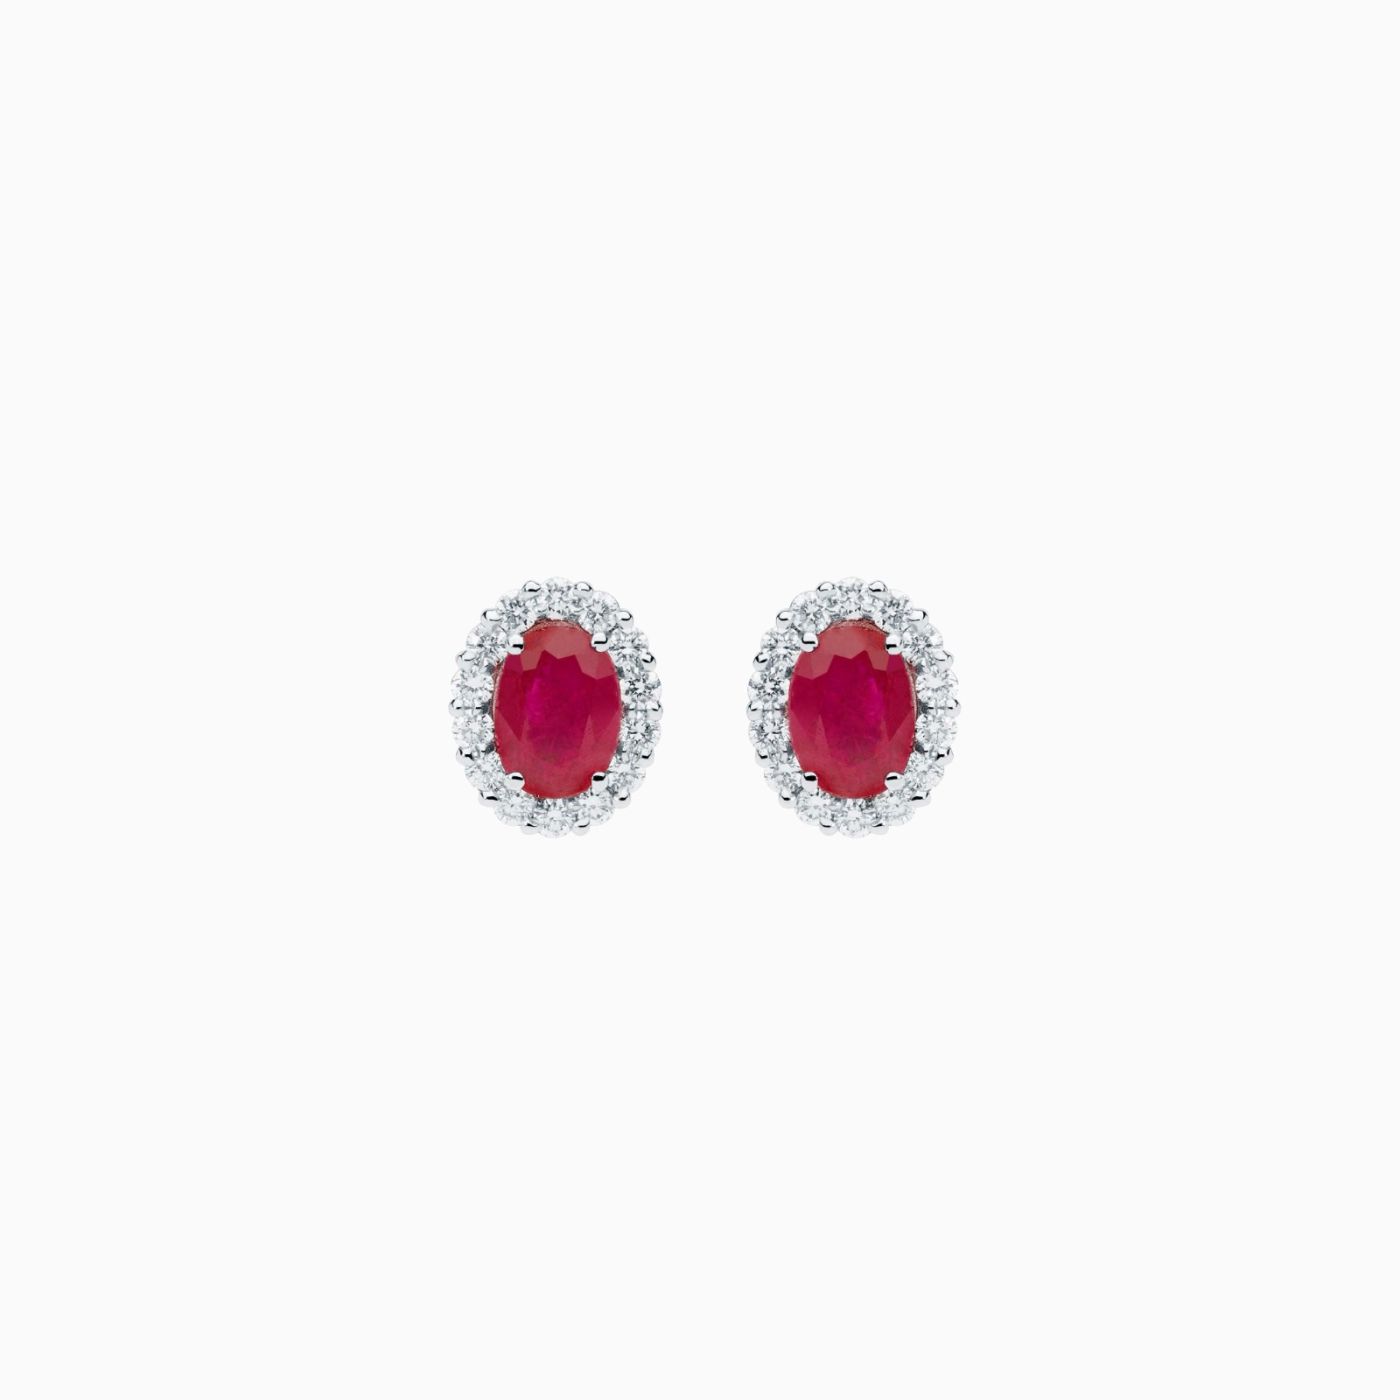 White gold earrings with rubies and diamond orla